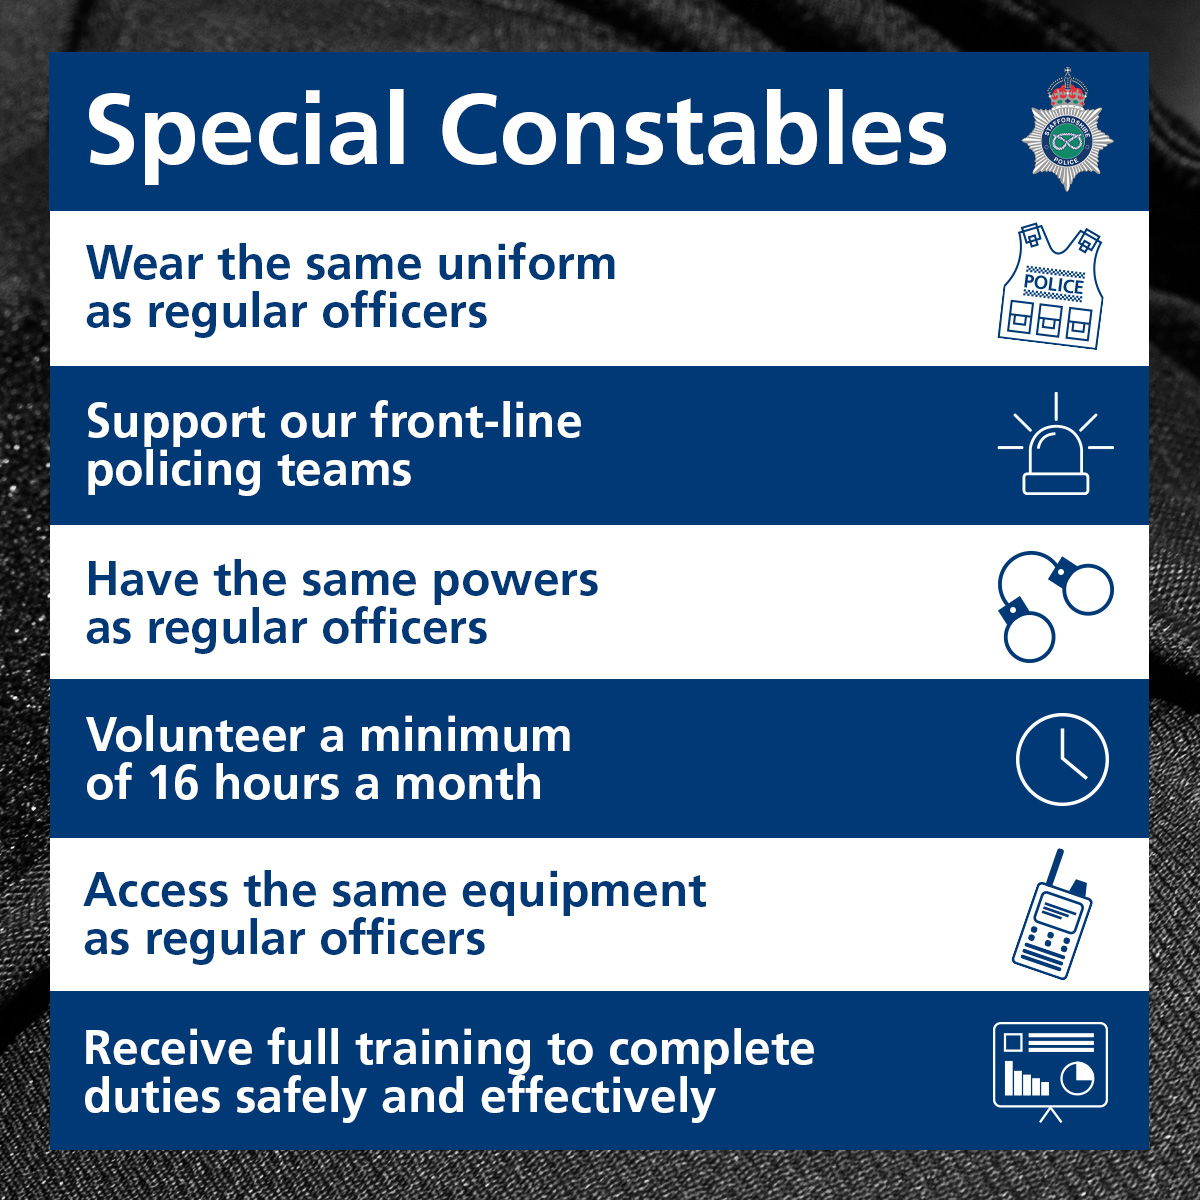 Apply now to become a Special Constable! 👮 Special Constables may be volunteer police officers but they have the same powers, uniform and training as regular police officers as they play a critical role in policing Staffordshire’s communities 🚔 💻 orlo.uk/jHCBV